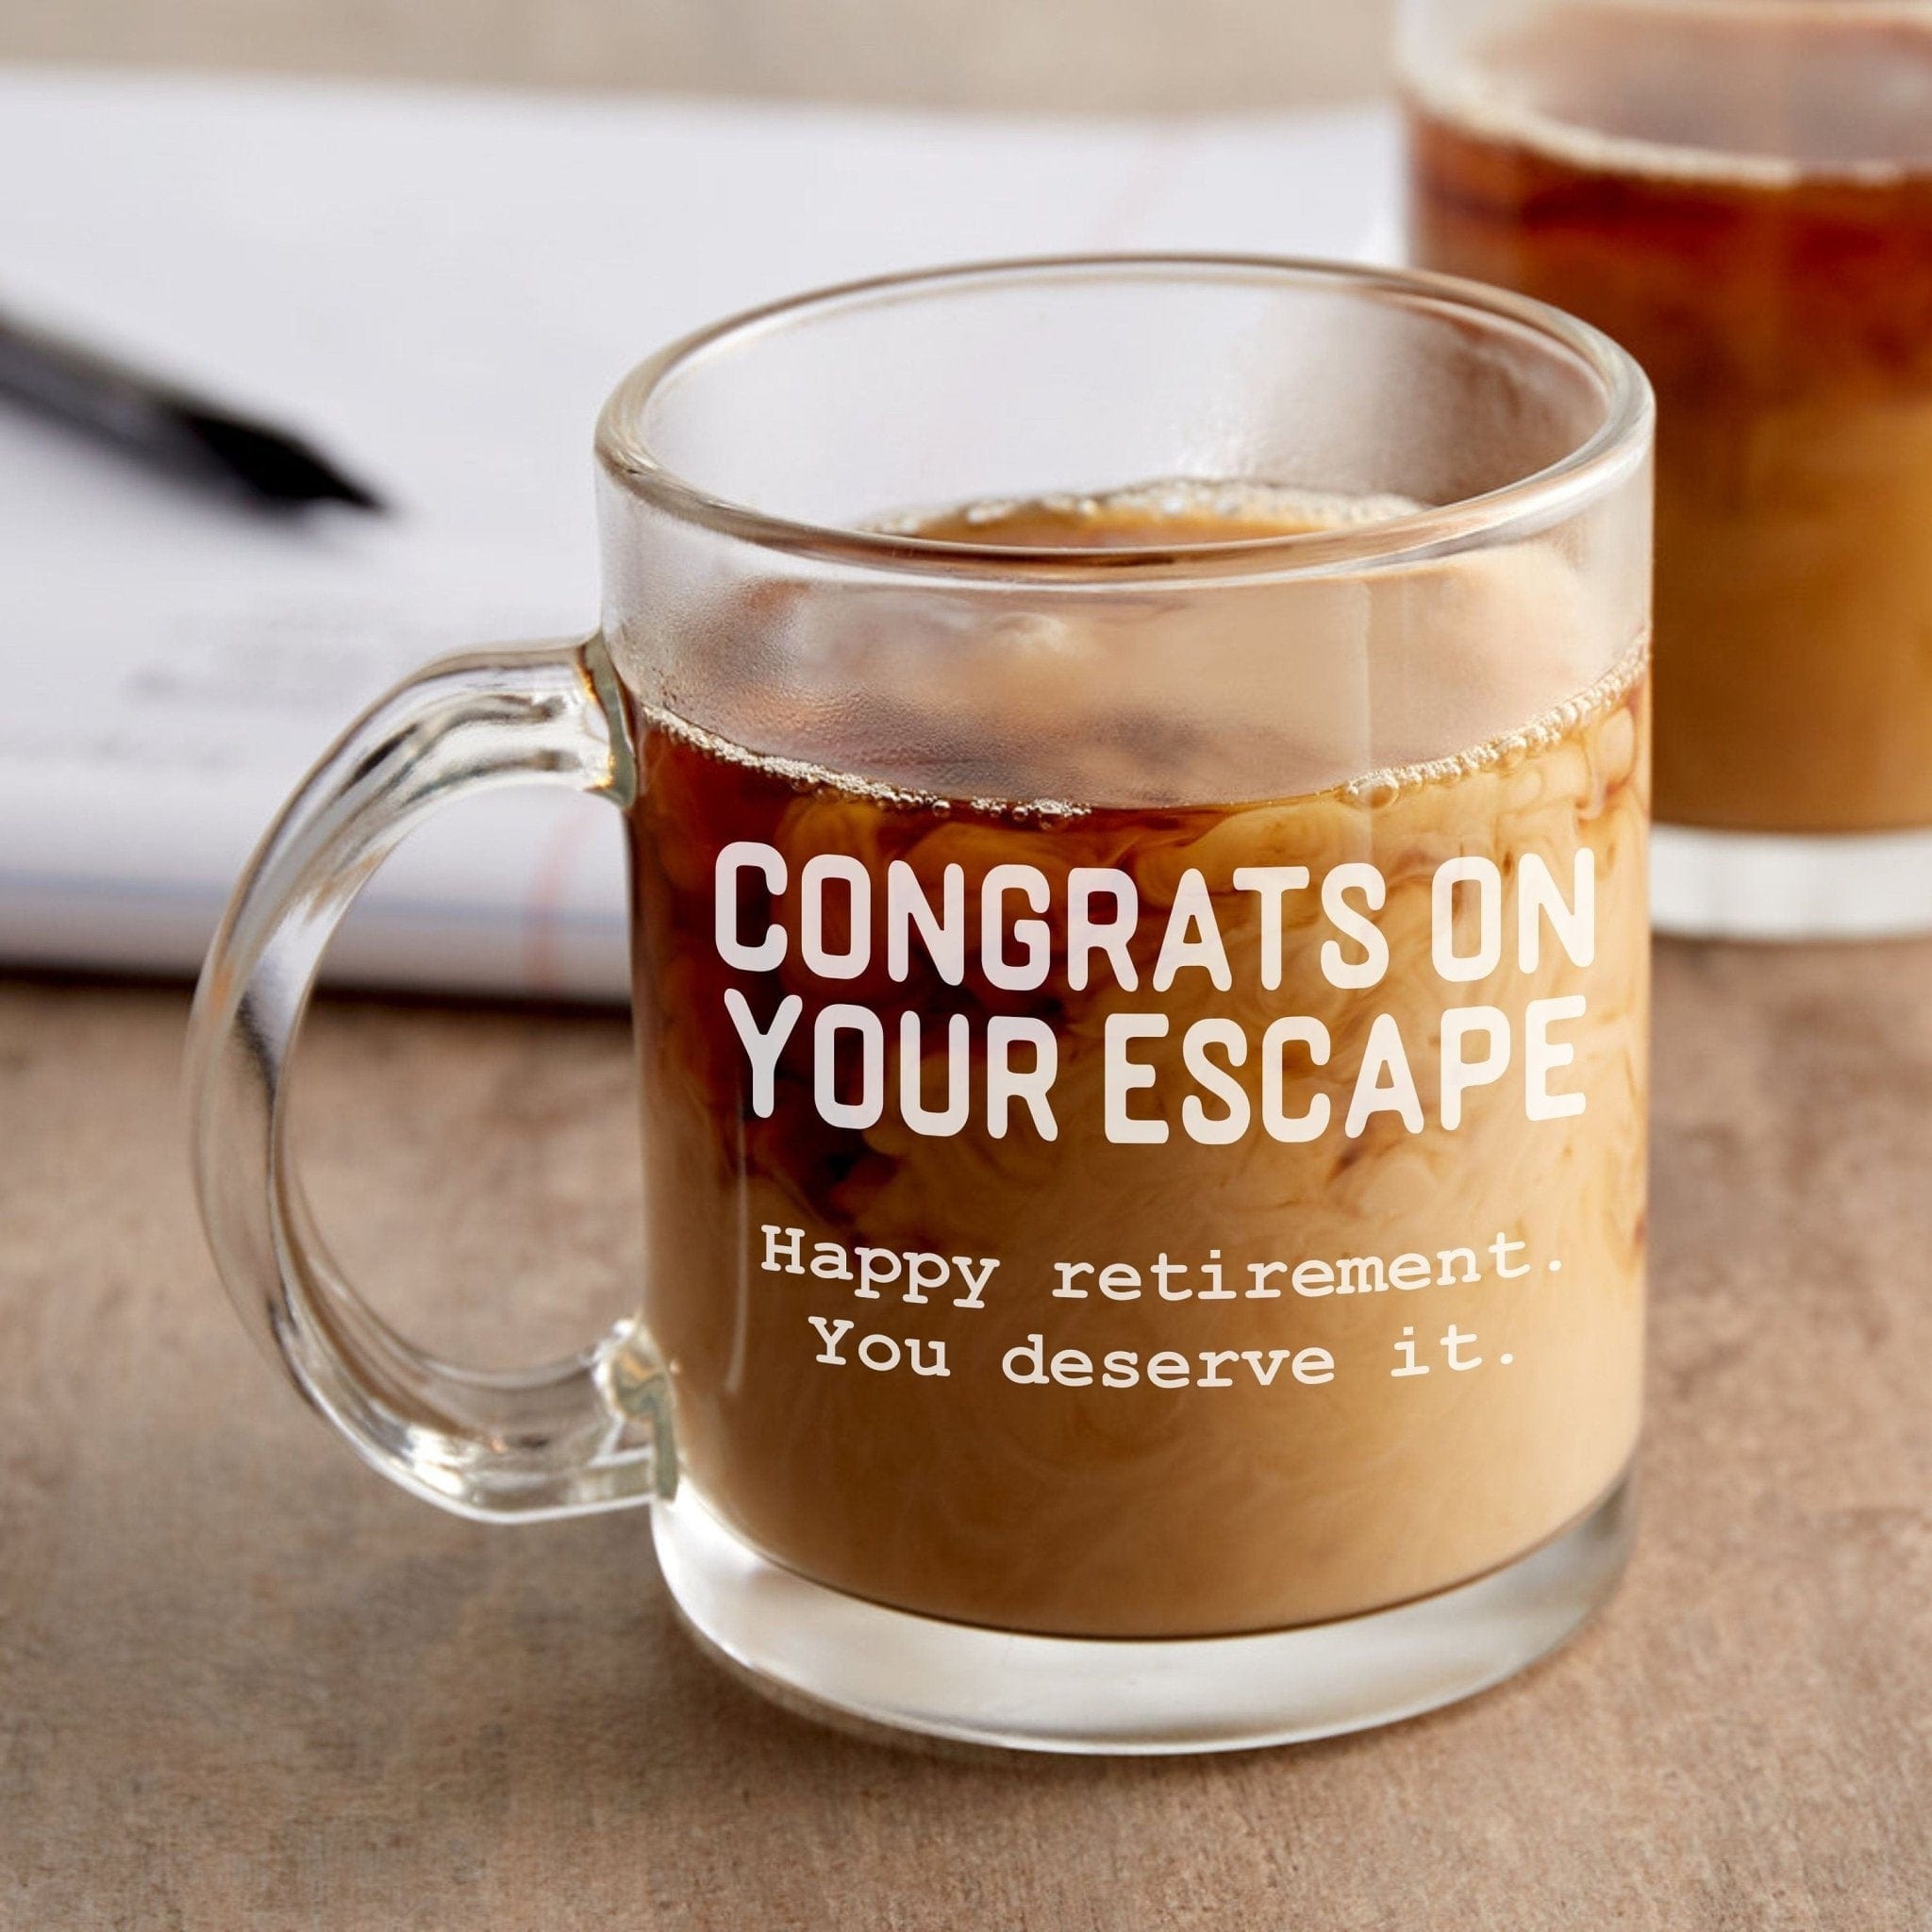 10 Thoughtful Retirement Gifts for Your Favorite Teachers